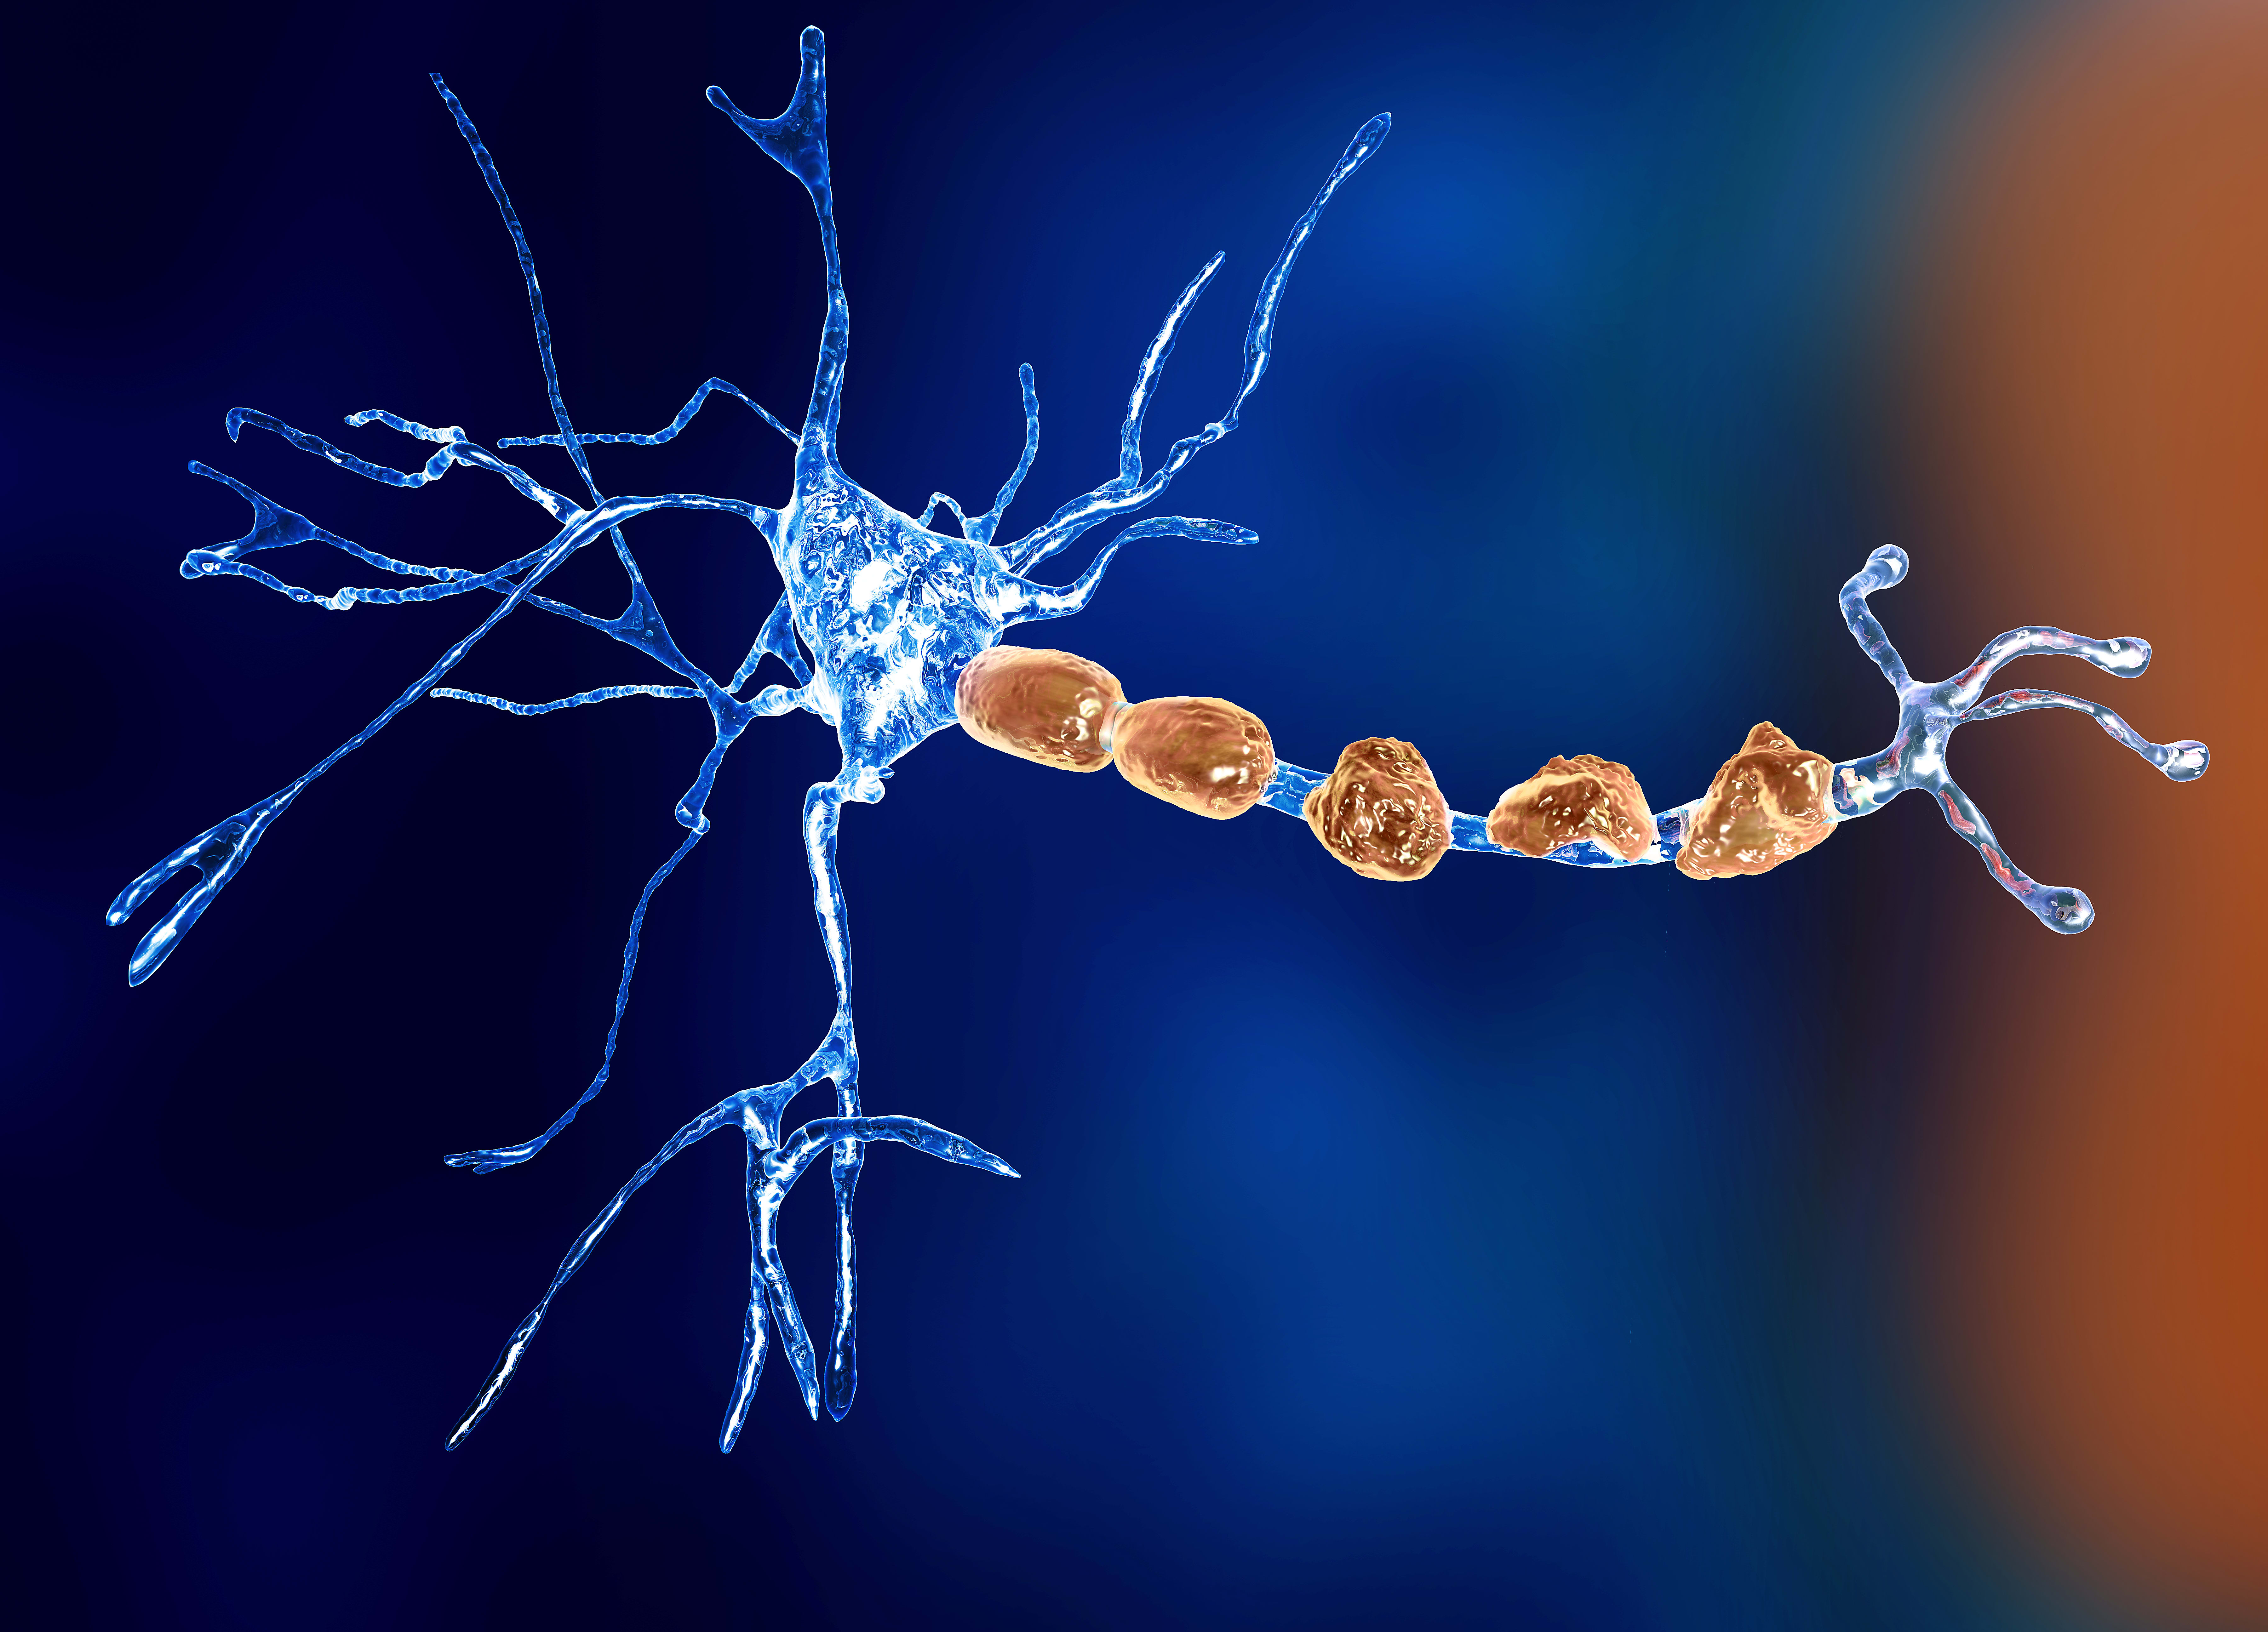 Figure 1. A neuron (blue) sheathed in myelin (orange) that is demonstrating demyelination from MS.